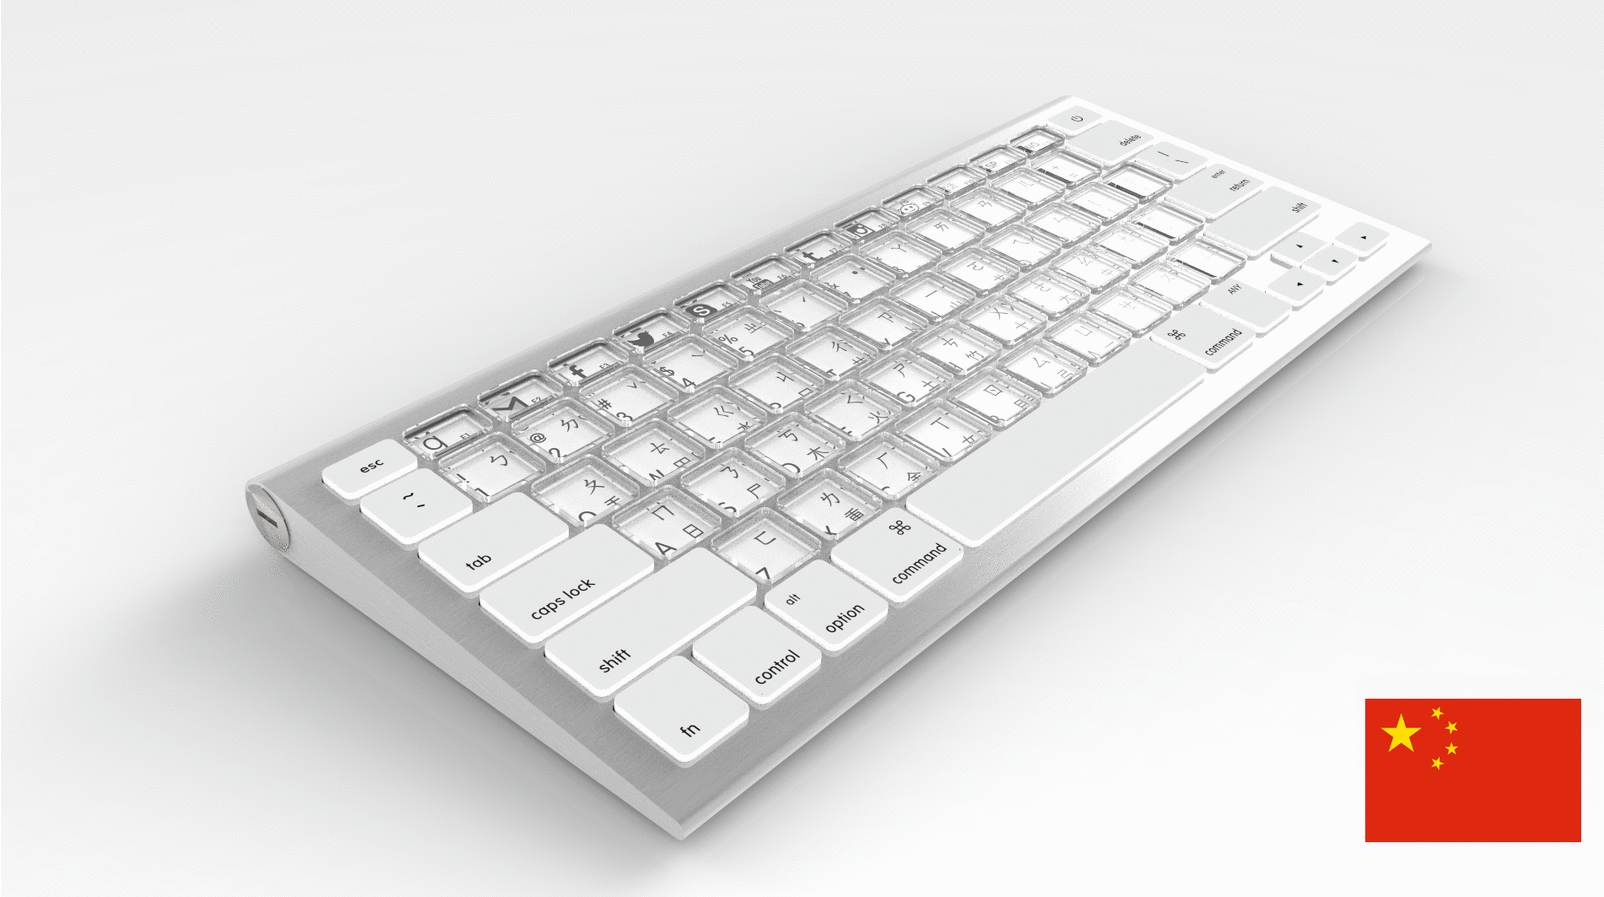 Worlds First E-ink Keyboard Offers Great Deal of Customization (1)